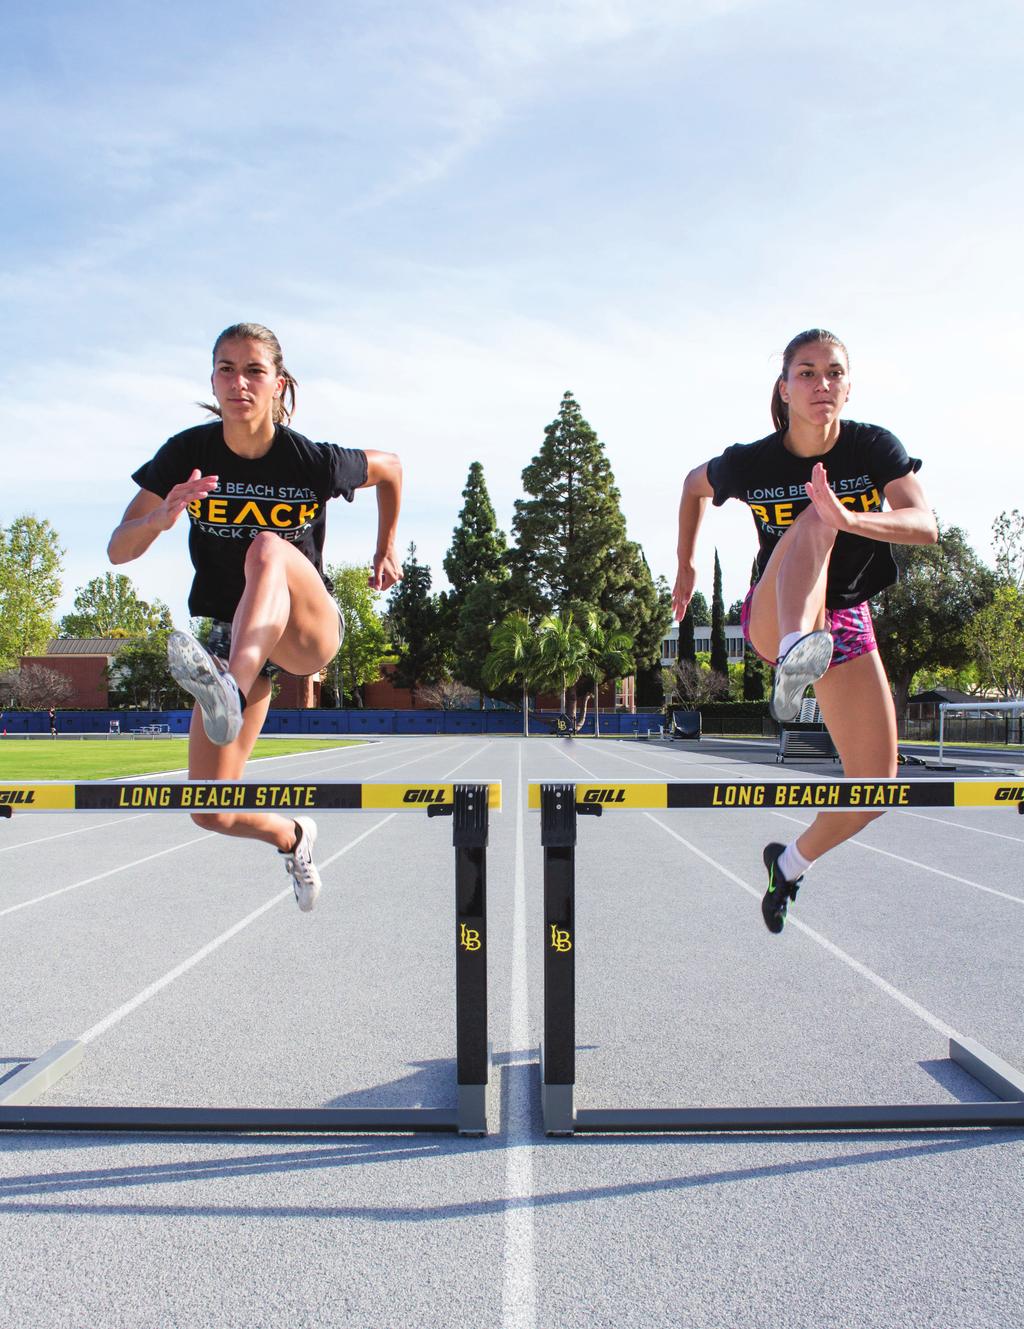 I f you happened to walk past them on campus, you would likely stare in awe at twin sisters Shalee and Shyann Reynolds. Standing at 5-foot-9, their physical presence catches the eye.